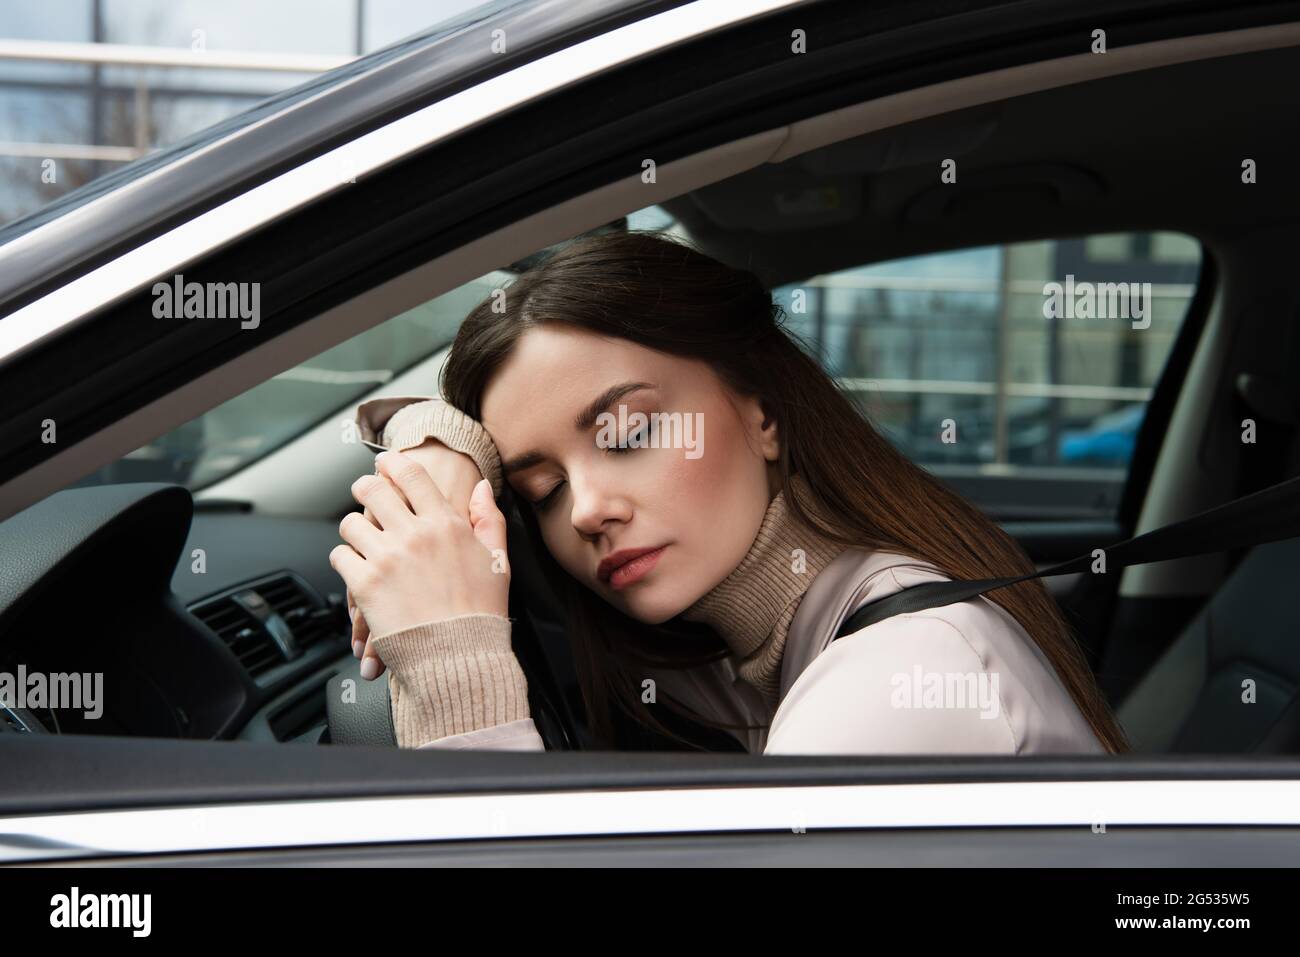 https://c8.alamy.com/comp/2G535W5/young-exhausted-woman-sleeping-in-car-at-steering-wheel-2G535W5.jpg